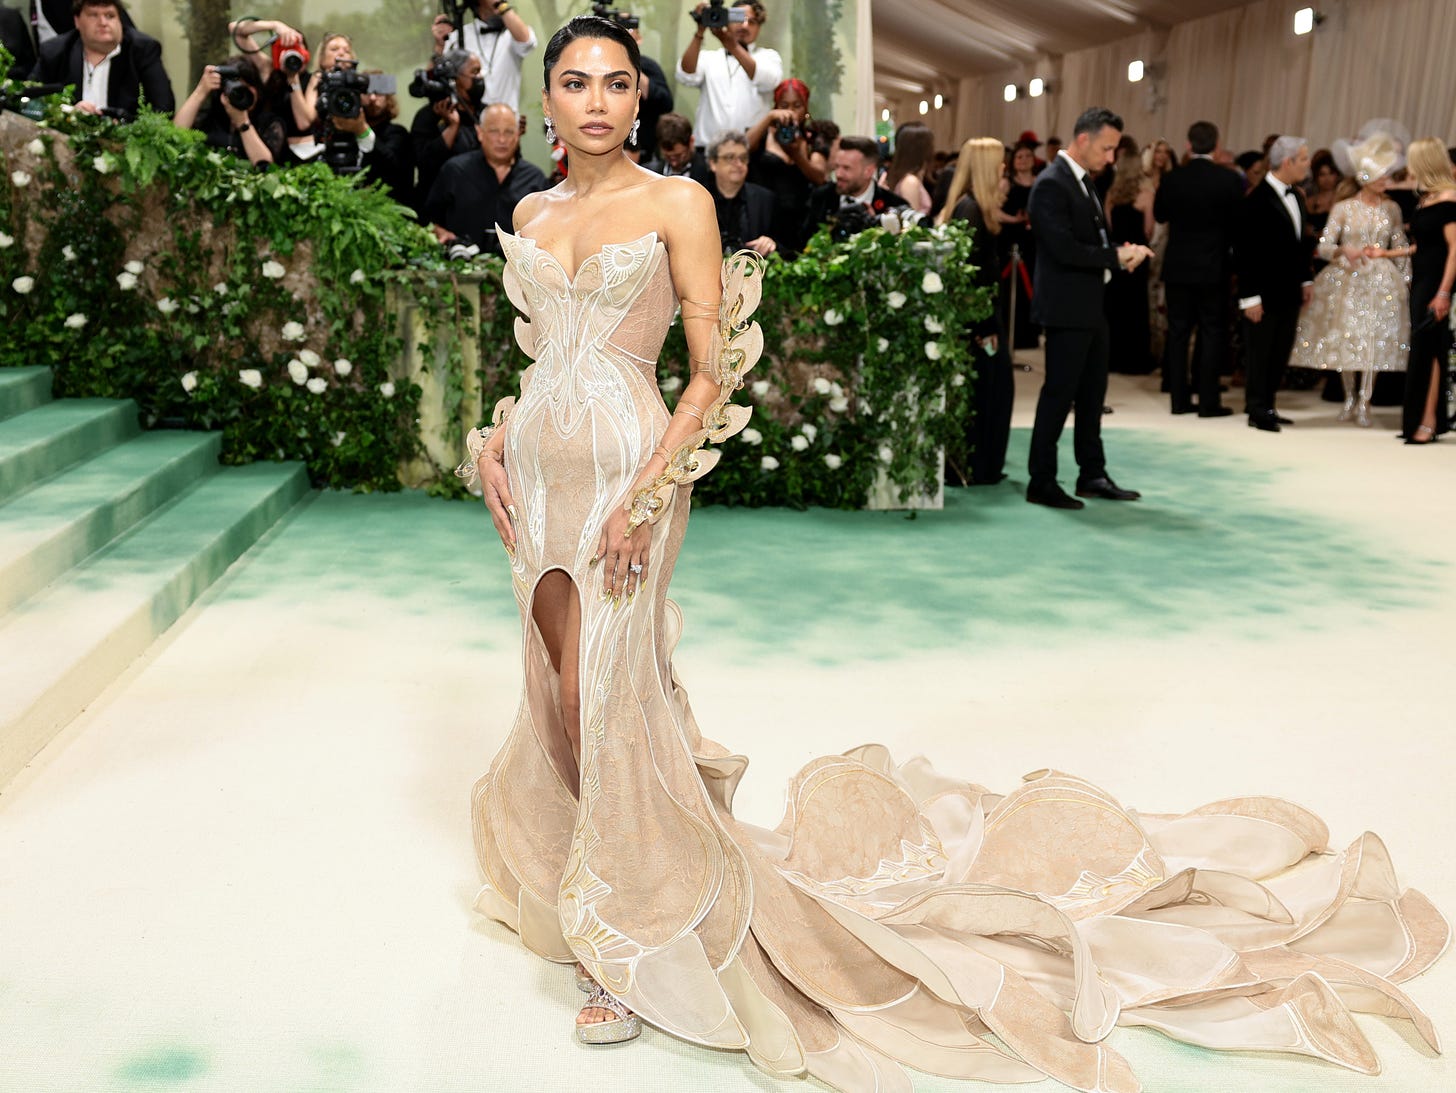 Mona Patel shares behind-the-scenes look at jaw-dropping Met Gala dress |  The Independent